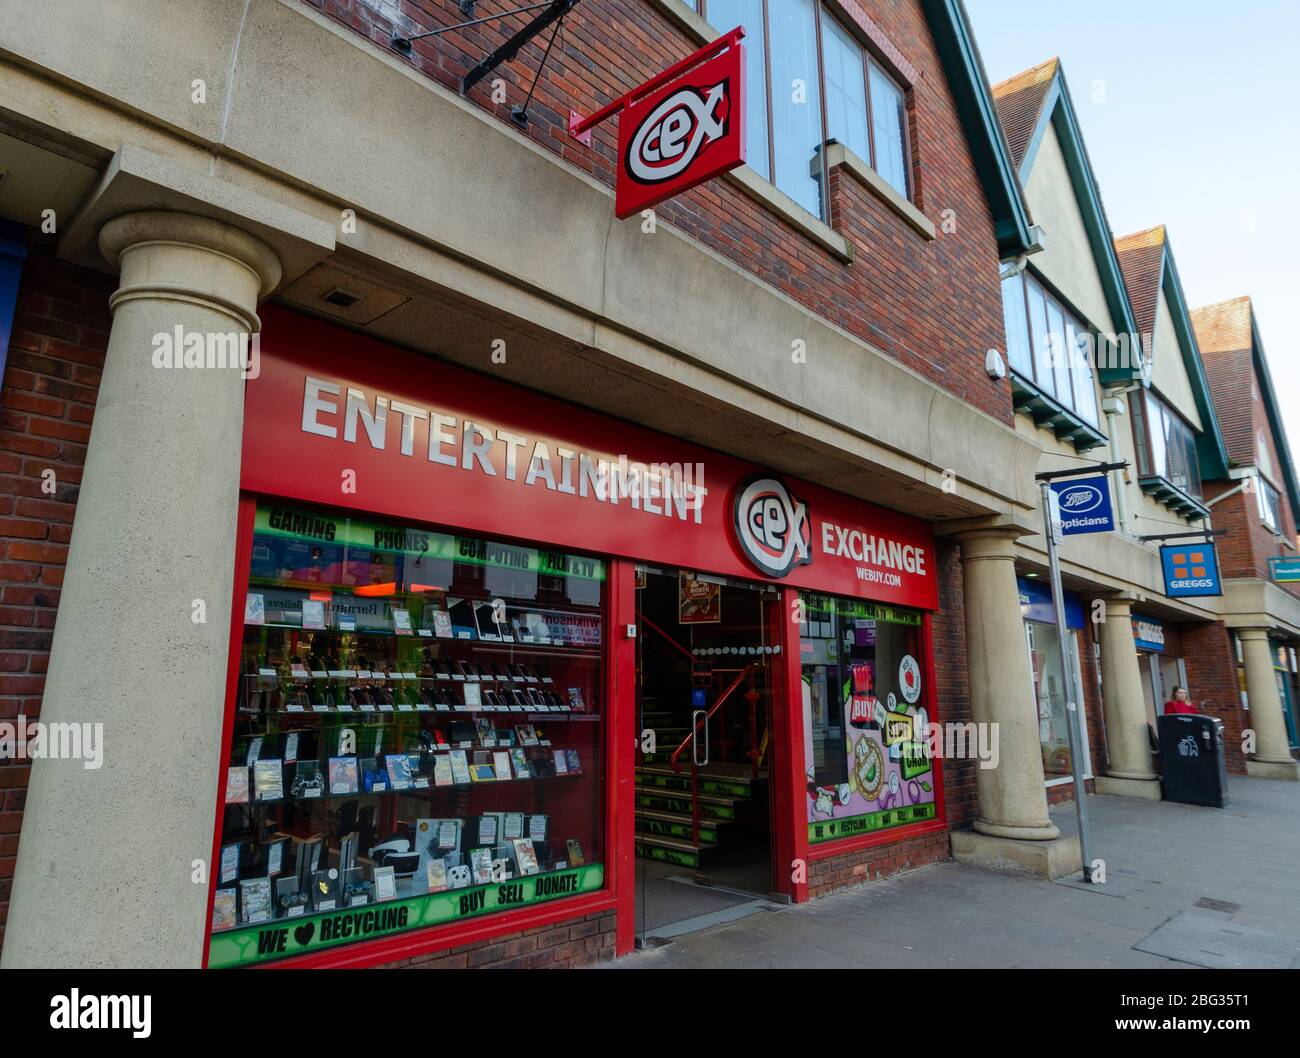 Chester, UK: Mar 1, 2020: CEX operate a shop on Frodsham Street. They are a national chain who buy and sell electronic entertainment devices and acces Stock Photo